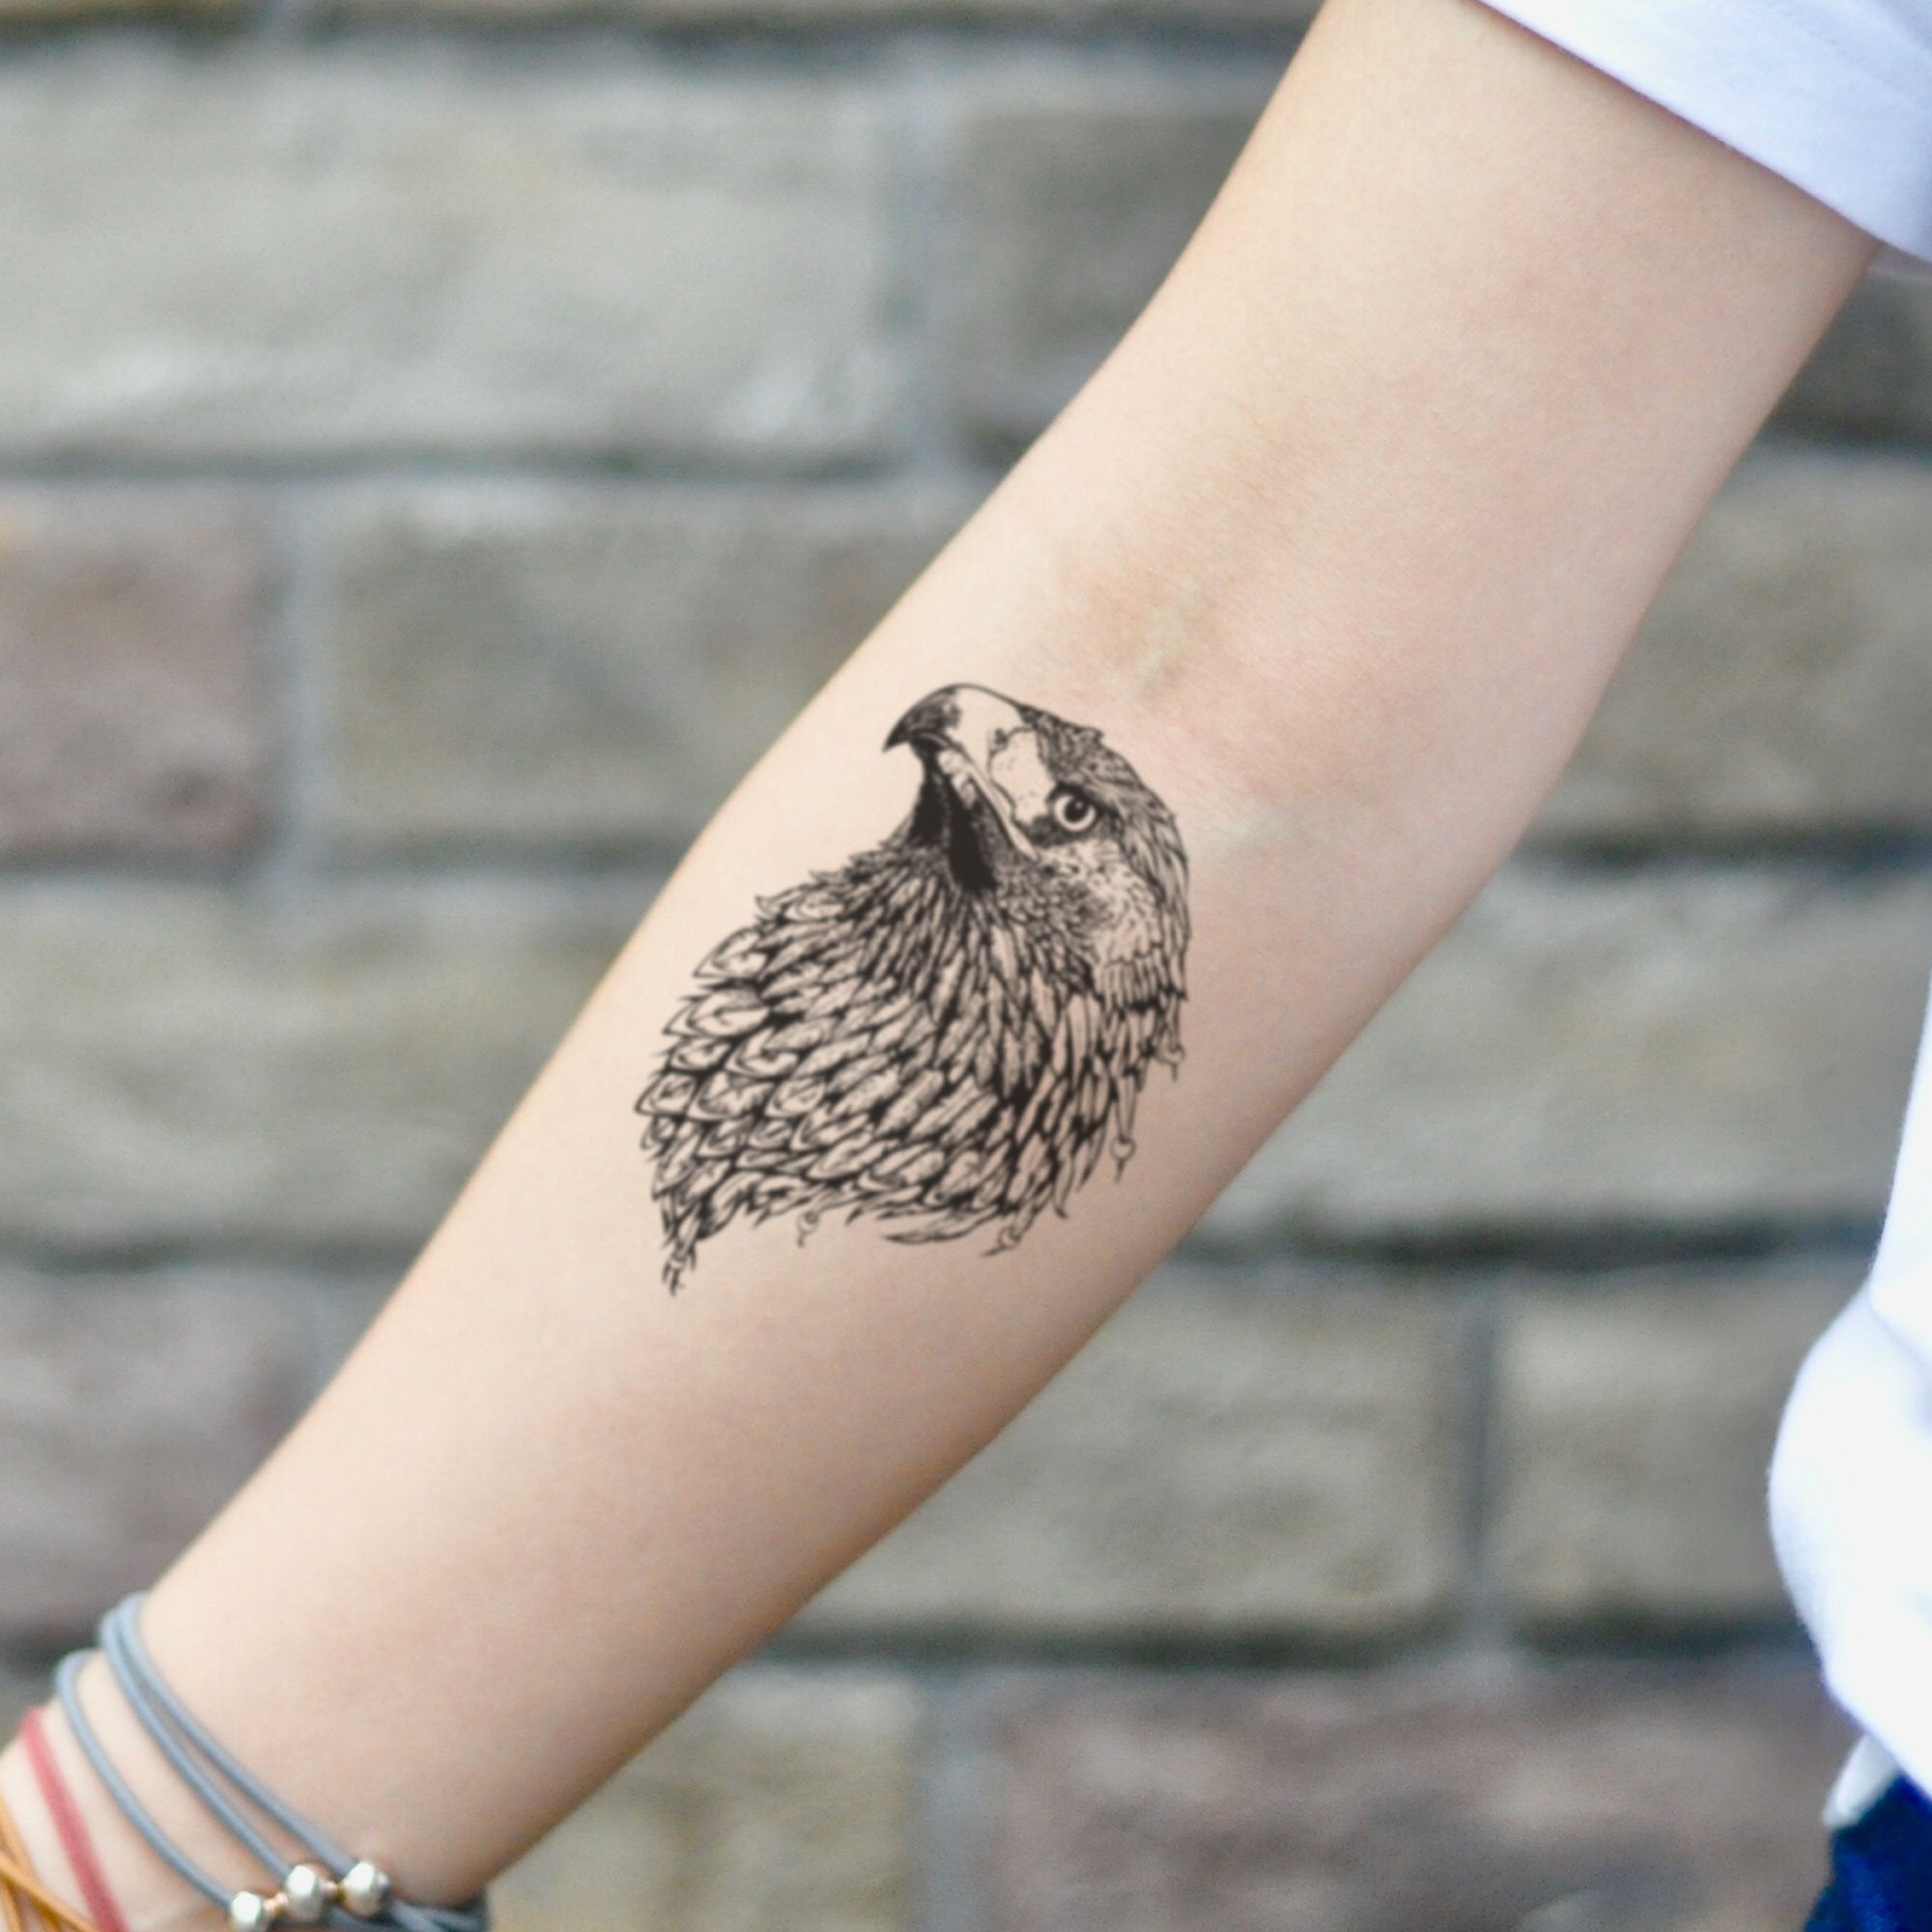 What do feathers and eagles symbolize in tattoos? - Quora